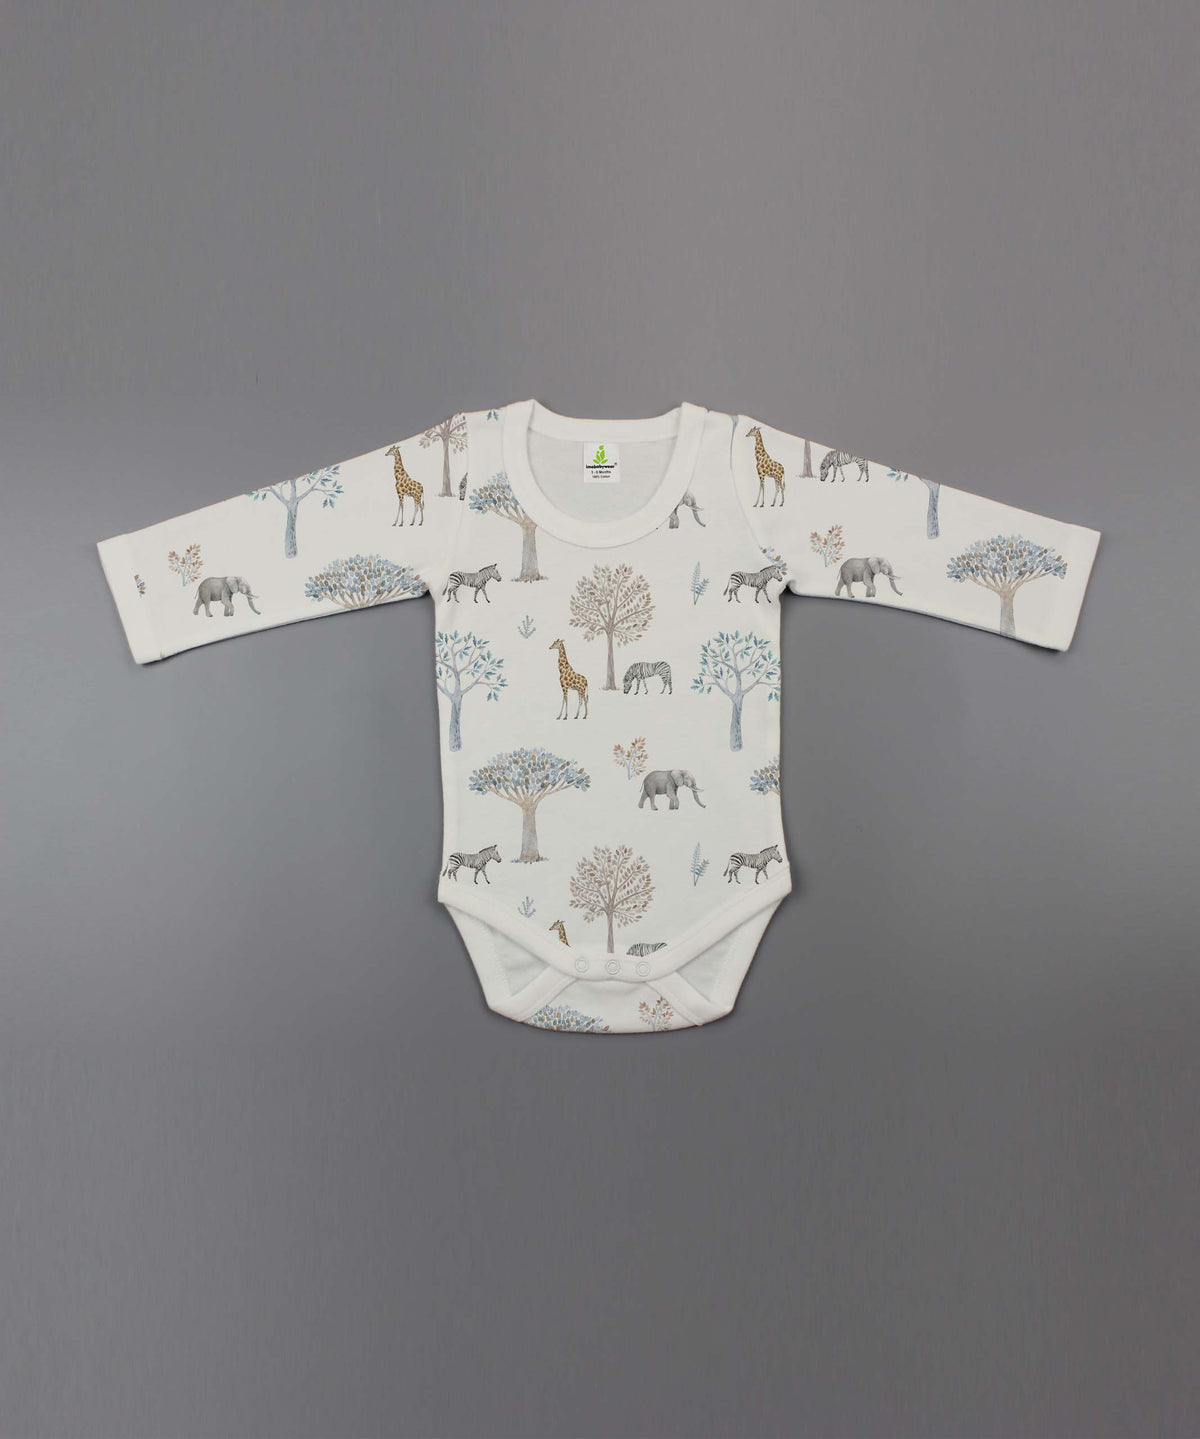 Imababywear Full sleeve Body Suit Forest Friends